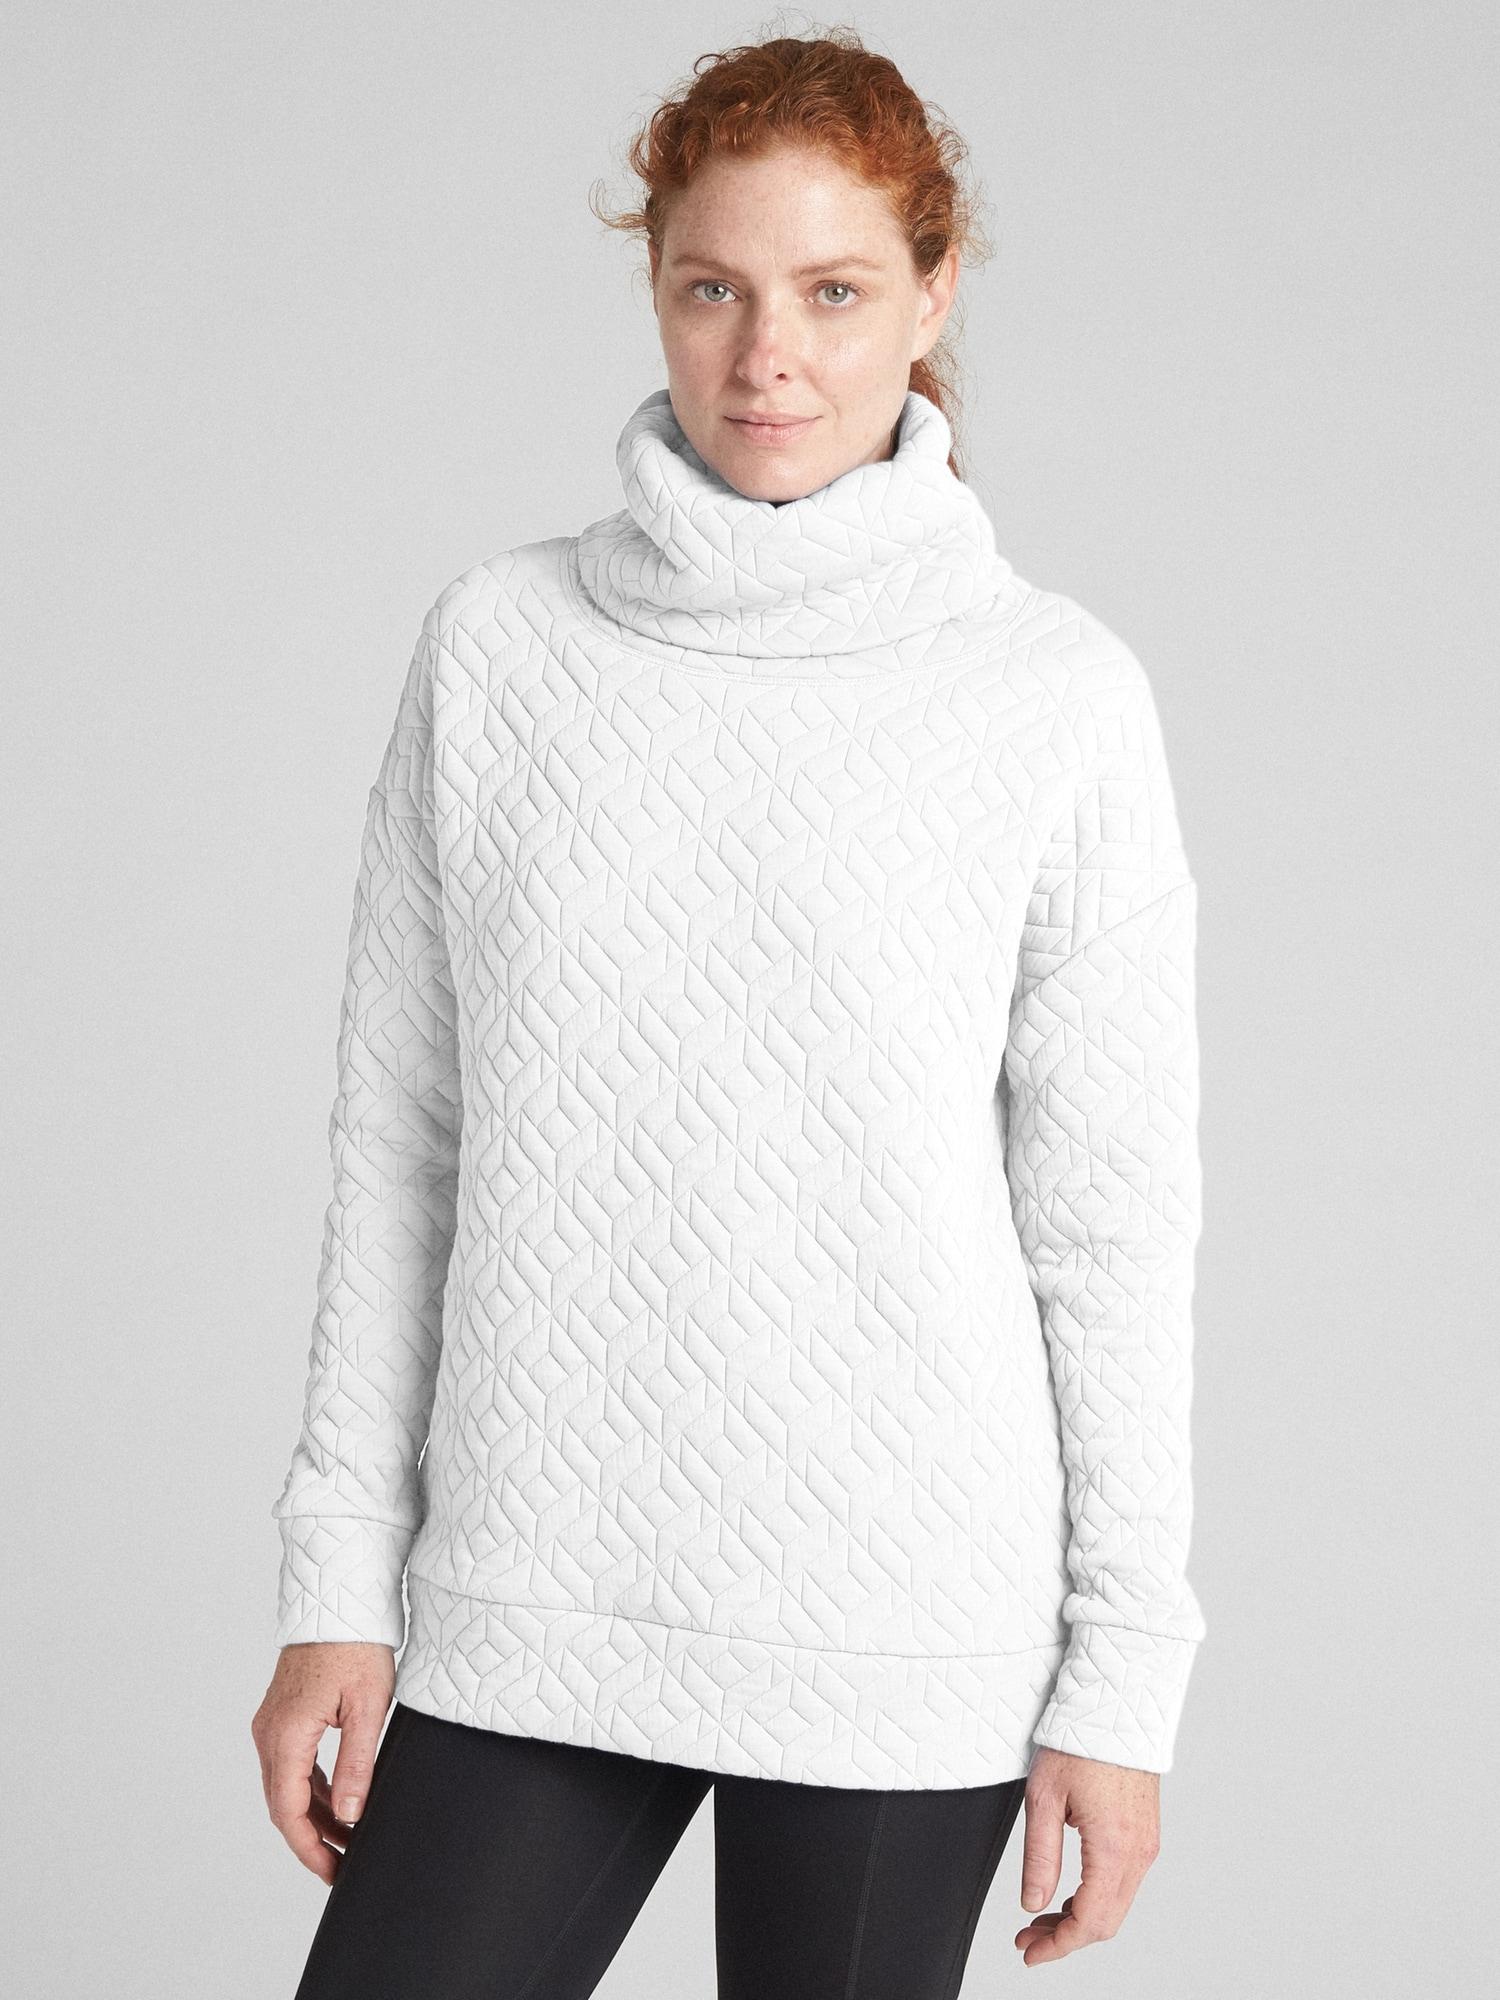 Gap Synthetic Fit Jacquard Knit Funnel-neck Pullover Sweatshirt in White -  Lyst